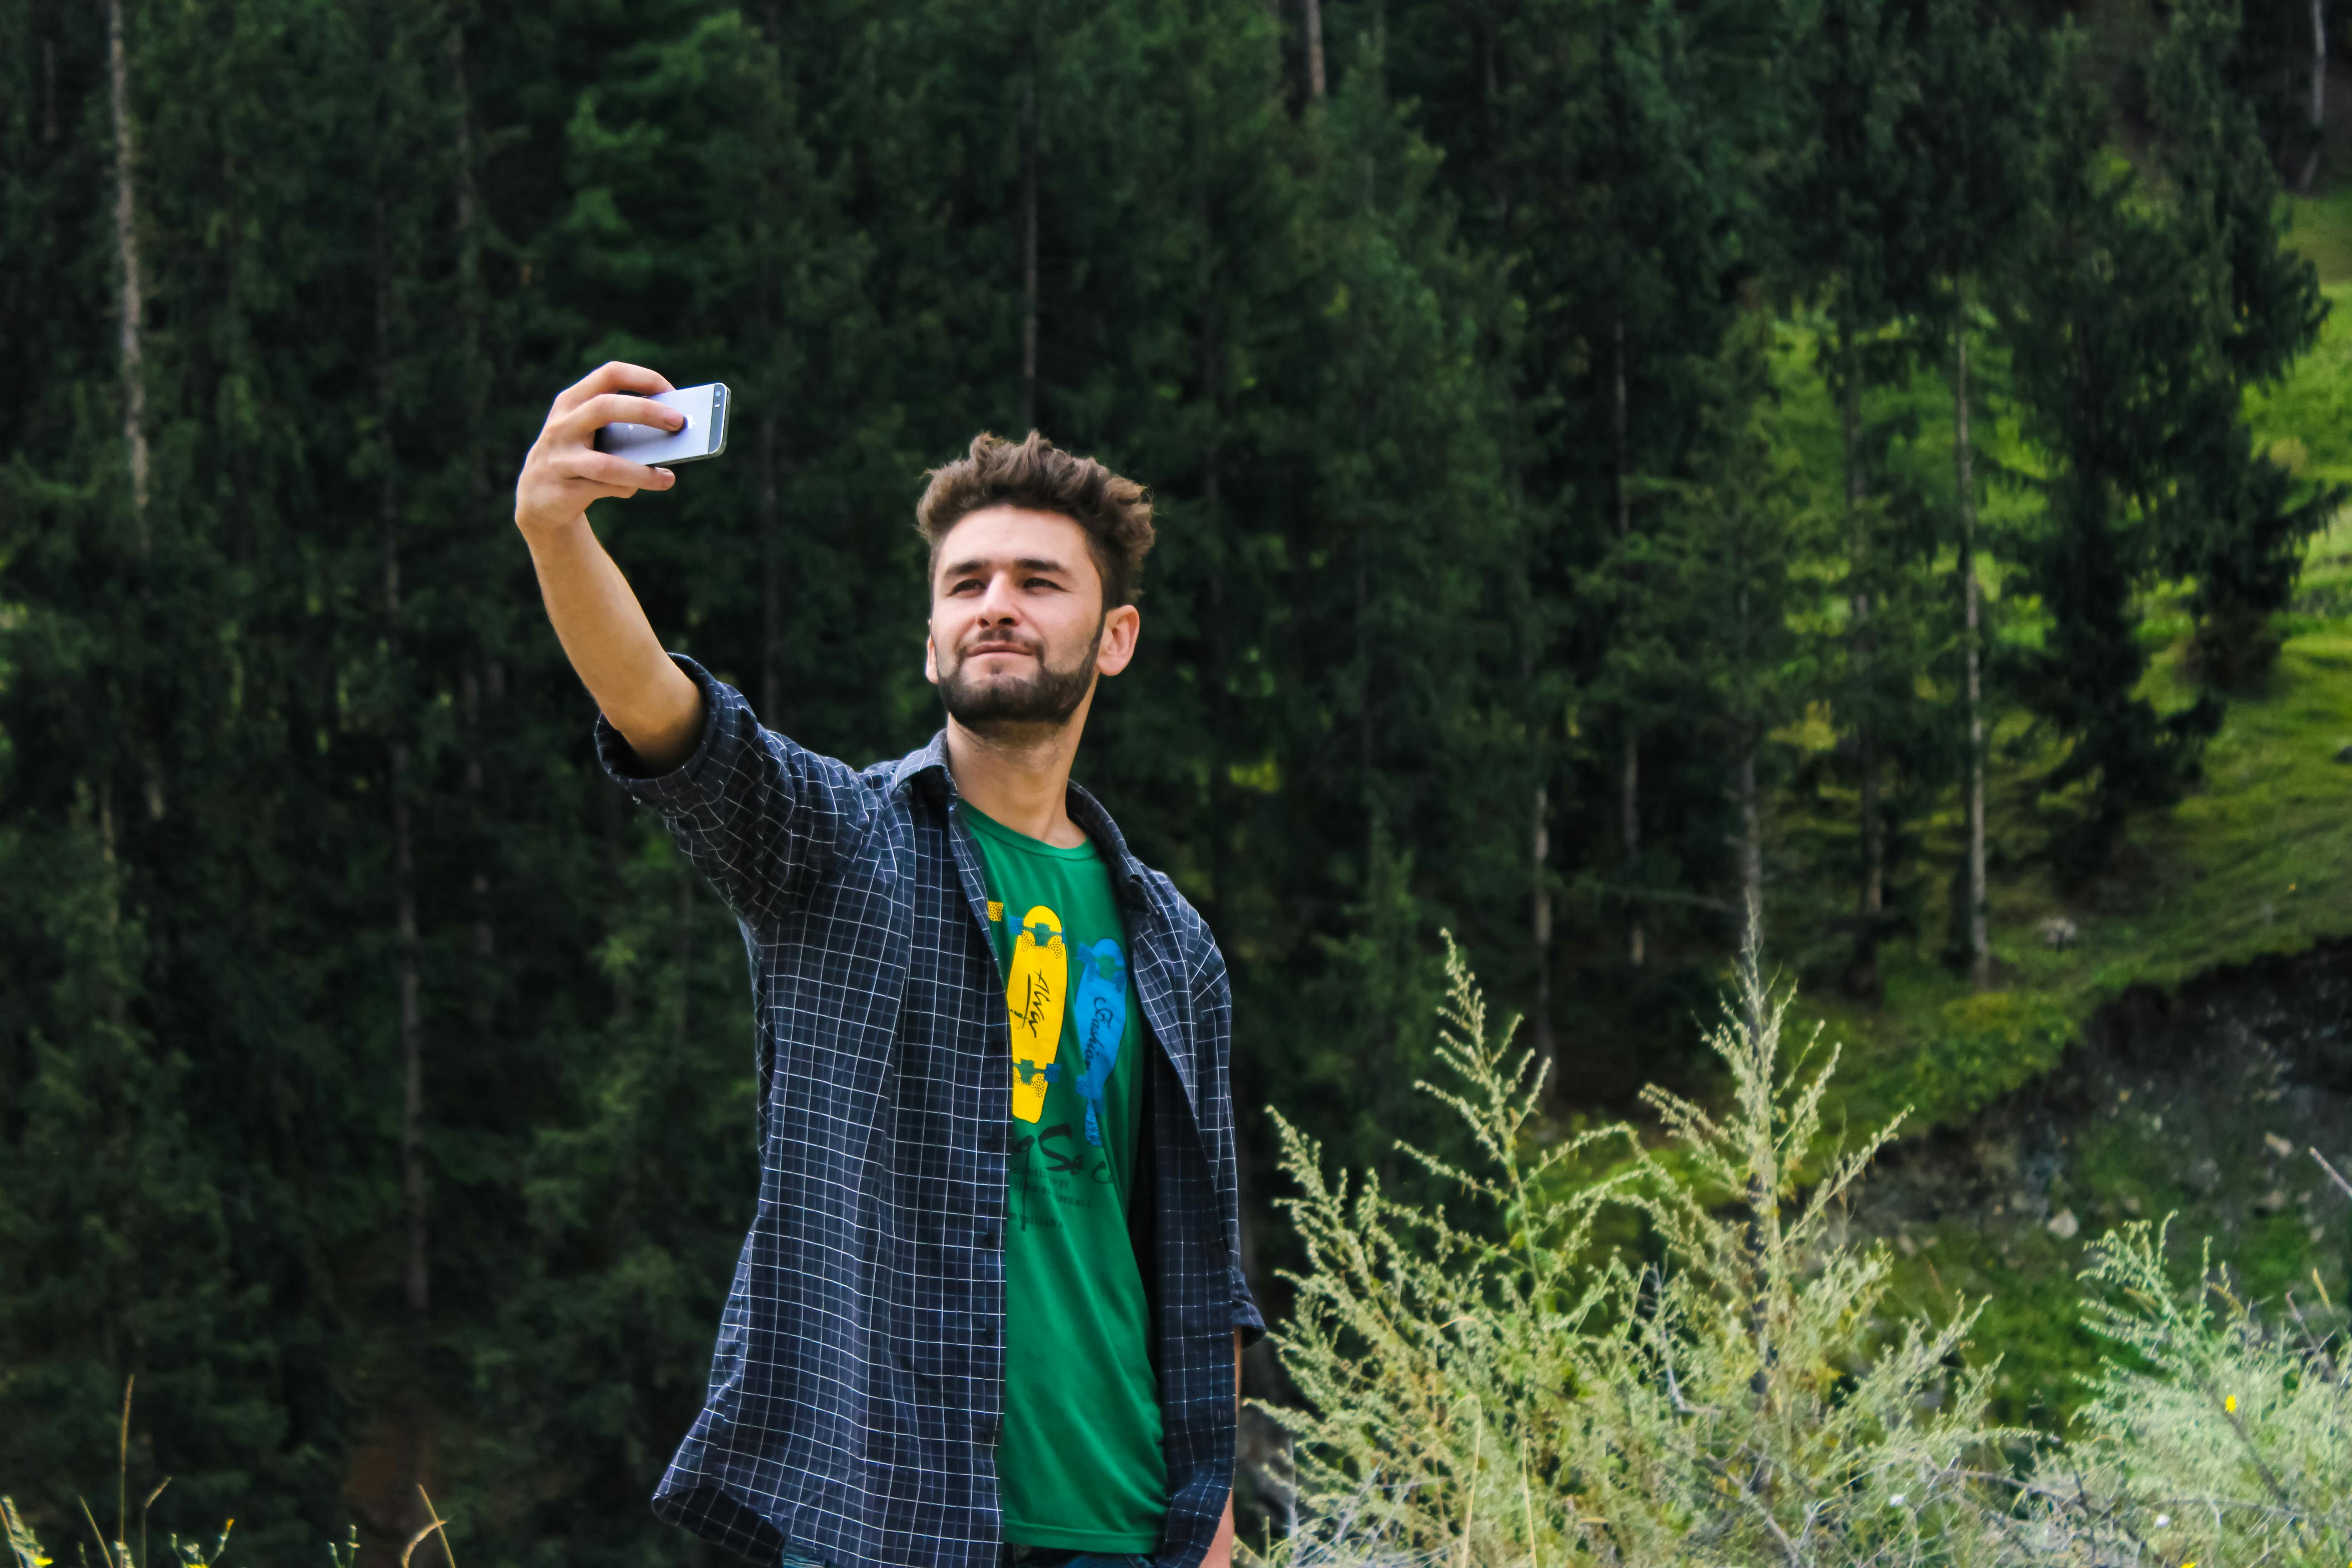 Man in Blue Sports Shirt and Green Top Taking a Selfie Near Green Trees